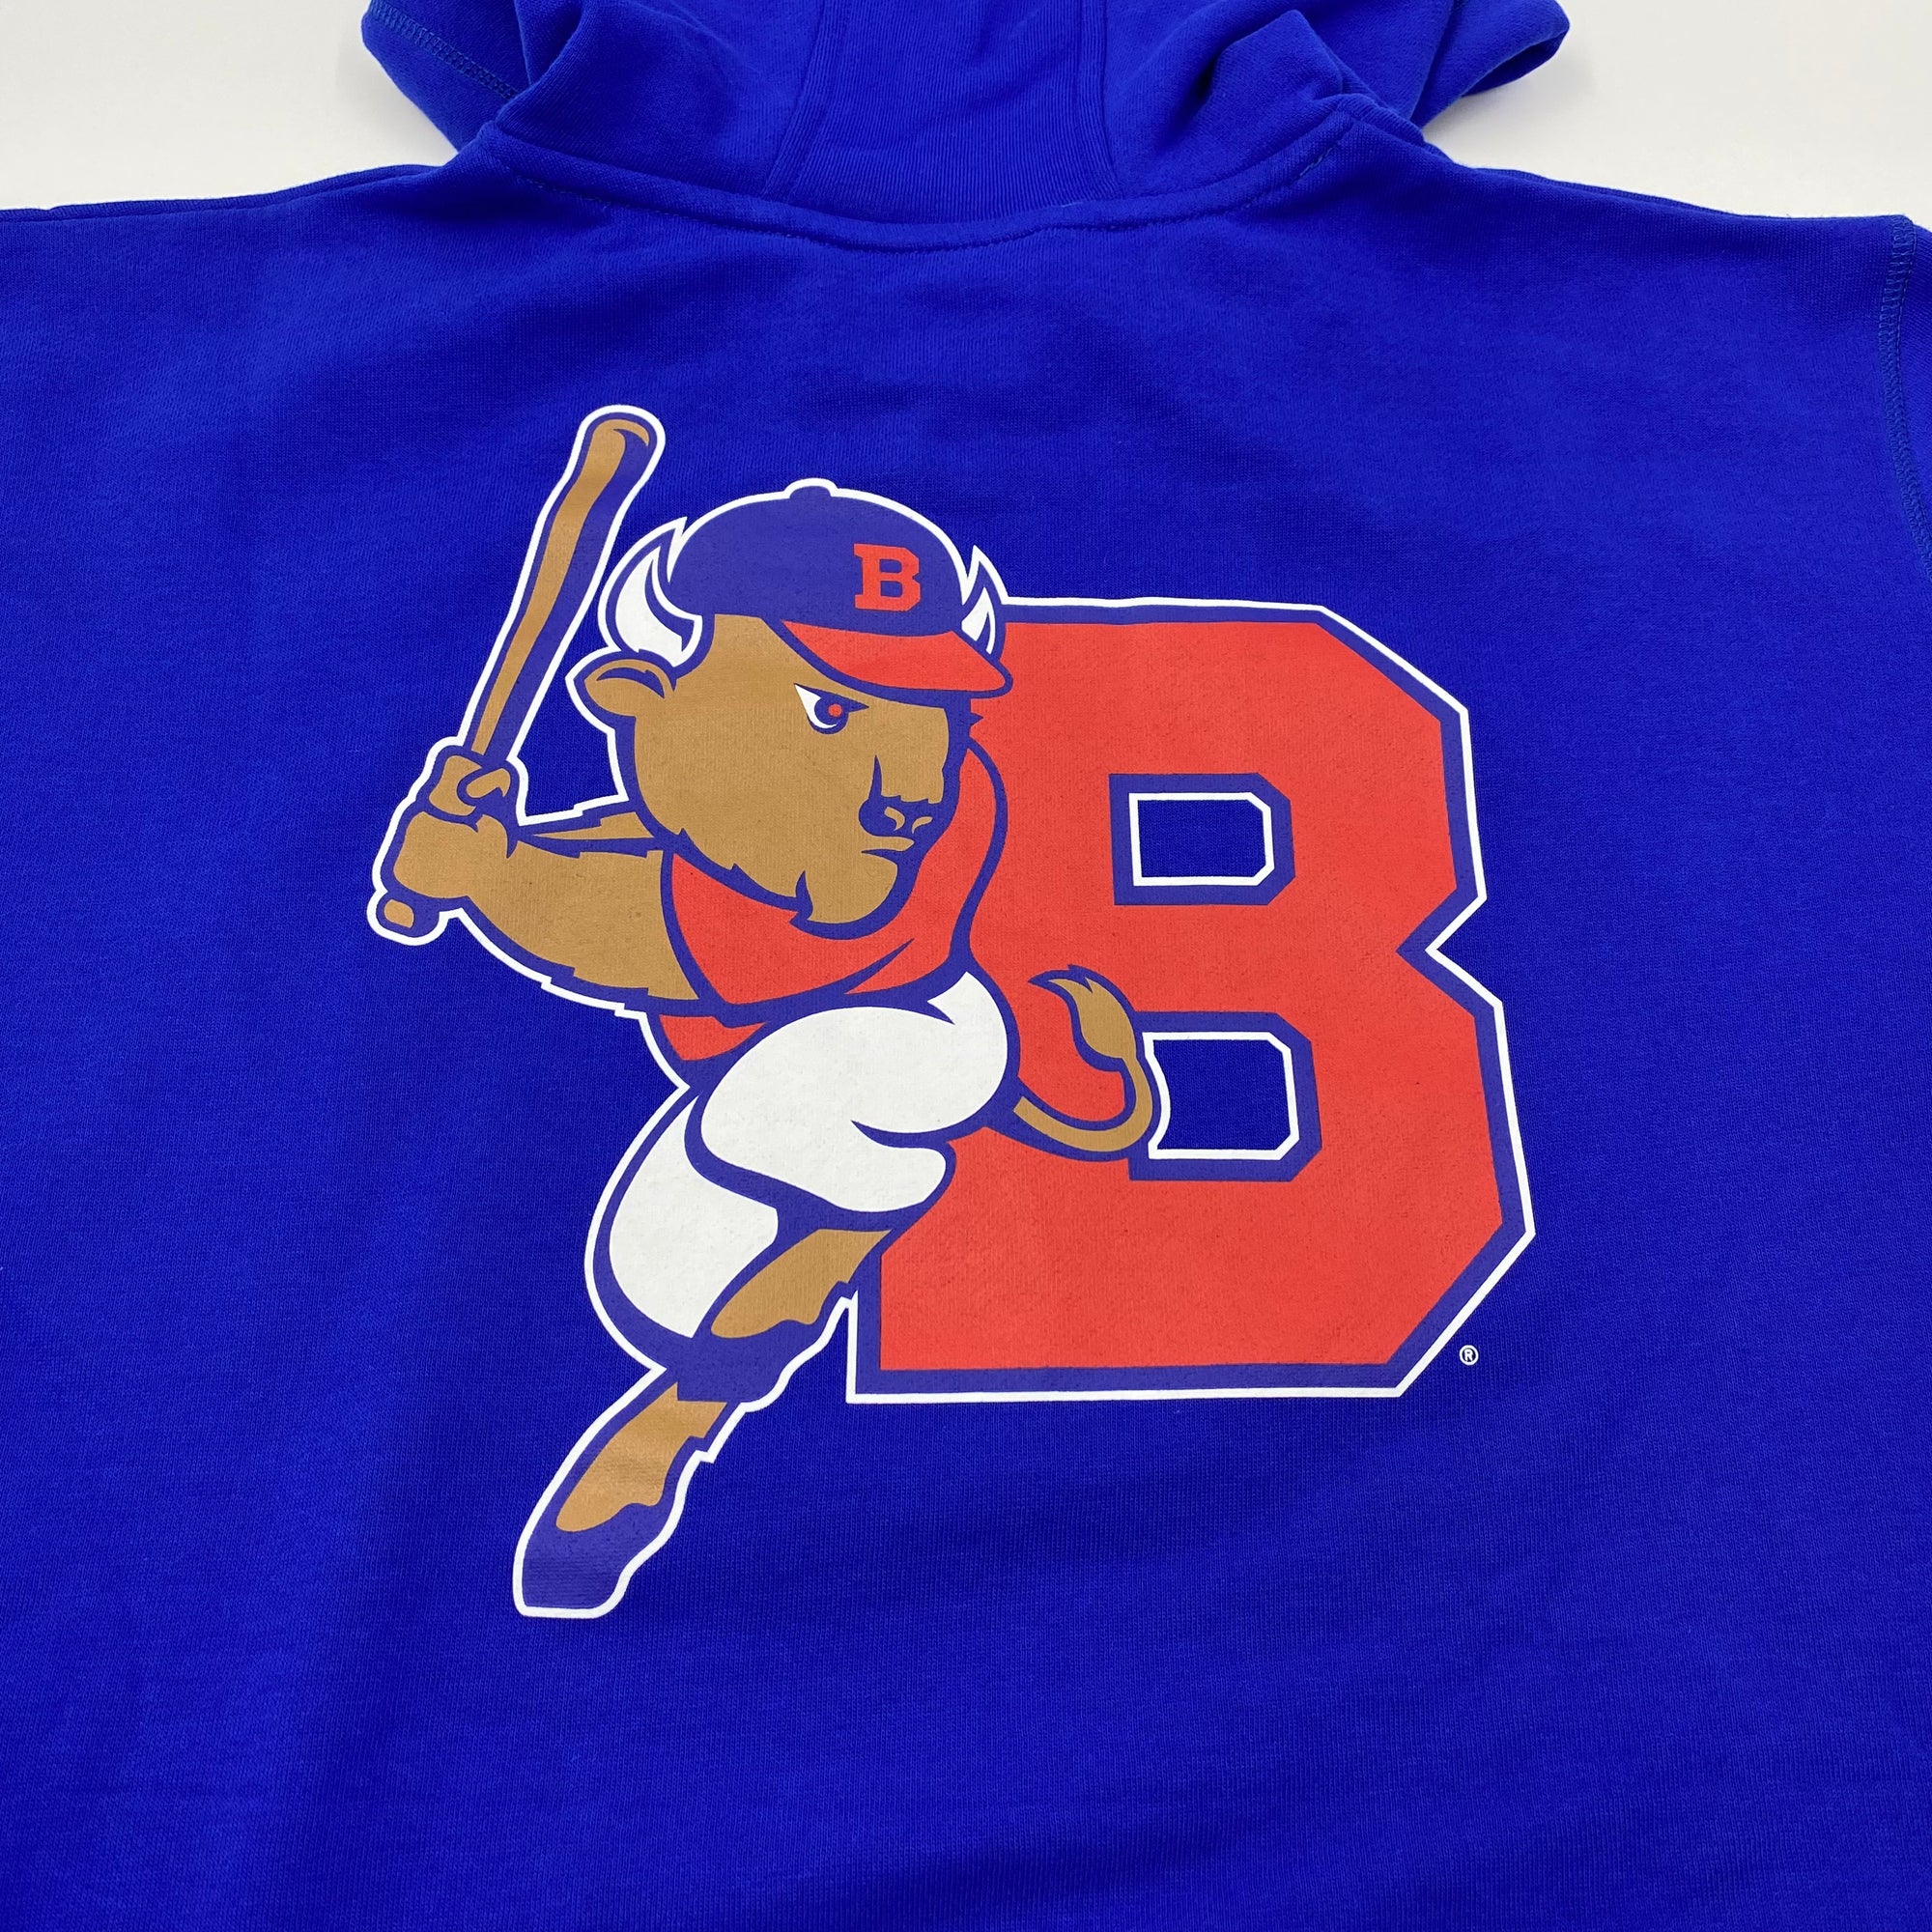 New Era Buffalo Bisons Blue Pullover Hoodie